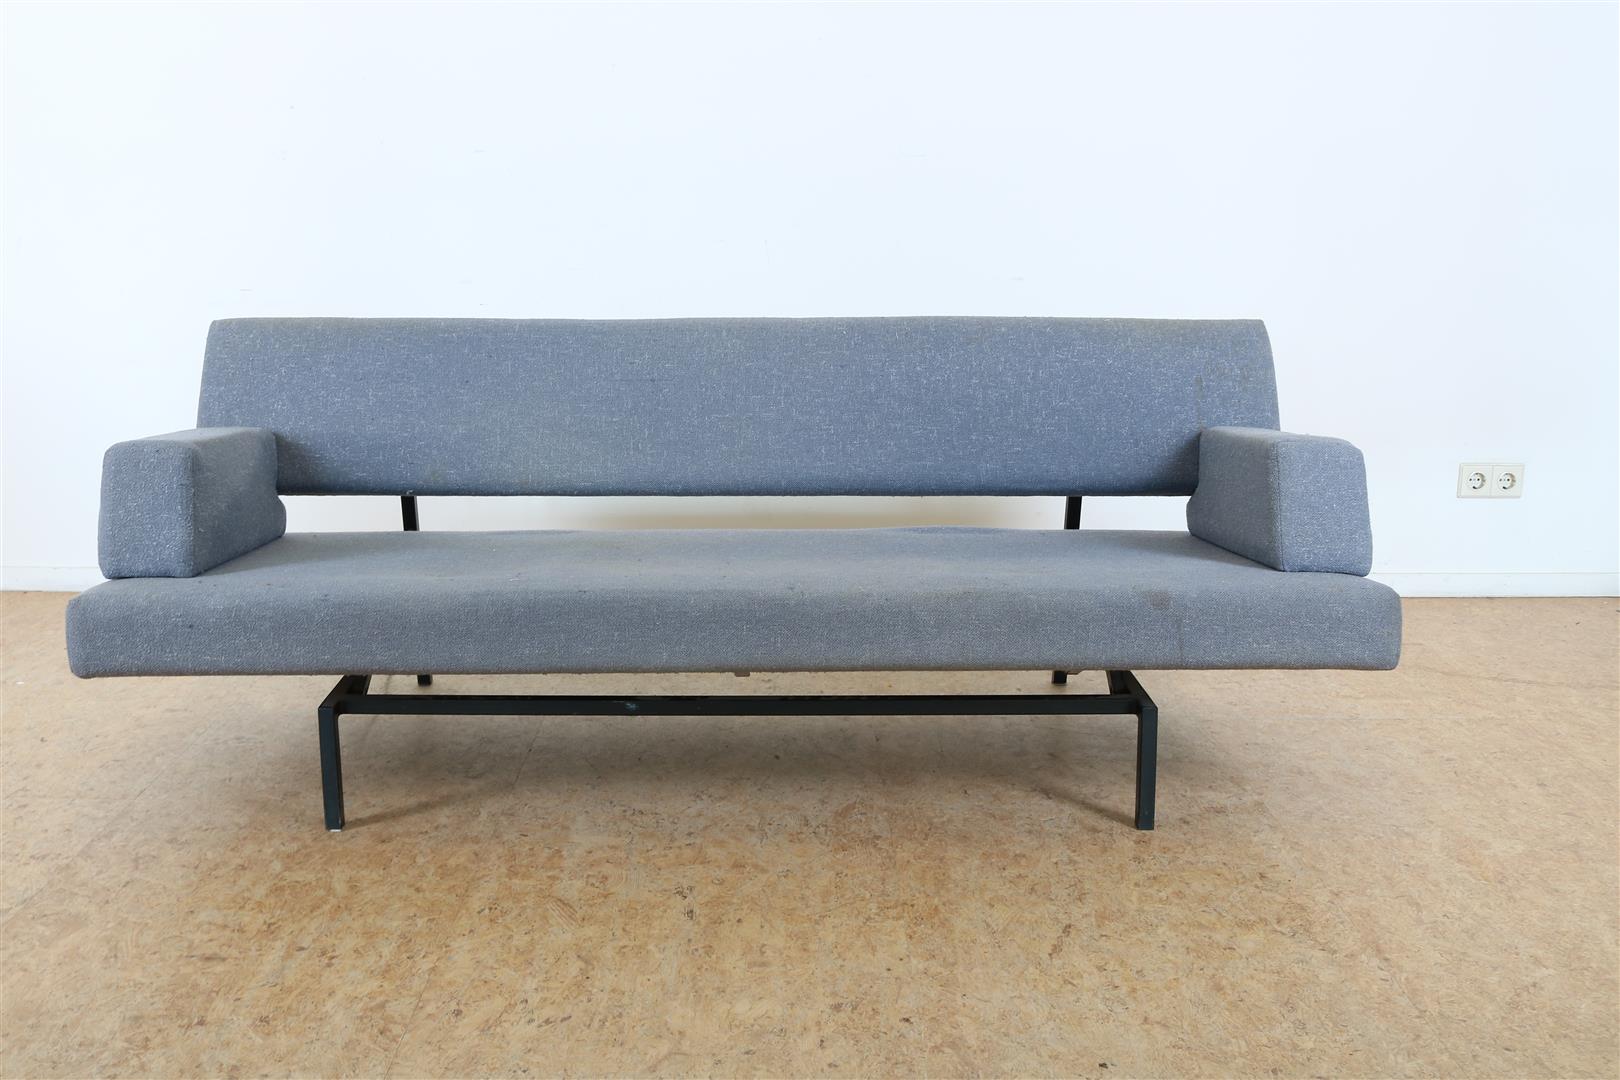 Designer sofa bed with gray wool upholstery and 2 loose cushions on a black base, Martin Visser, - Image 2 of 8